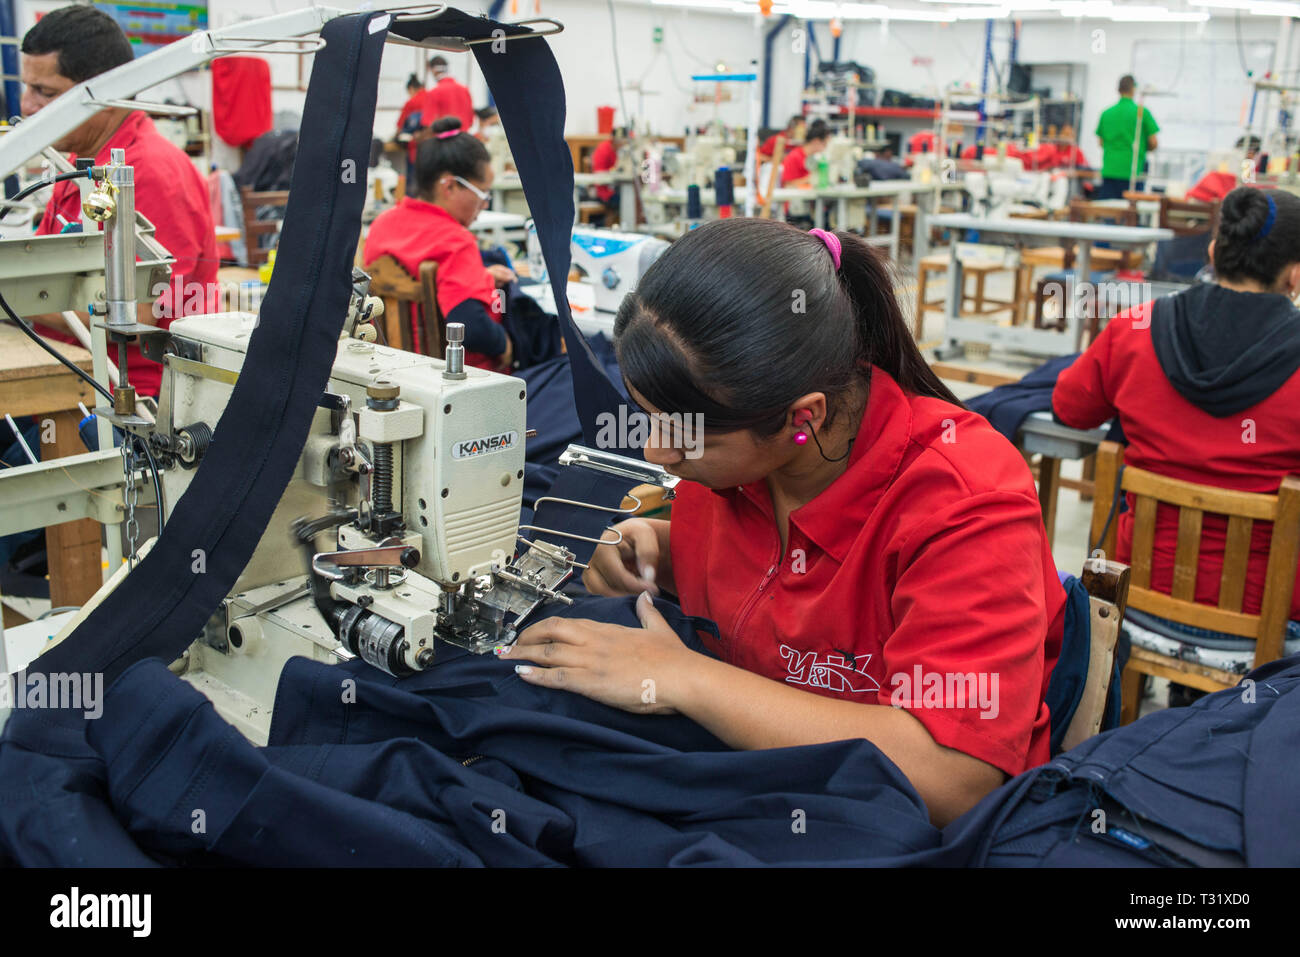 Donmatias, Antioquia, Colombia: Somos Jeans is a factory that produces for its own brand, Square, and for foreign brands such as Diesel in Italy. Stock Photo